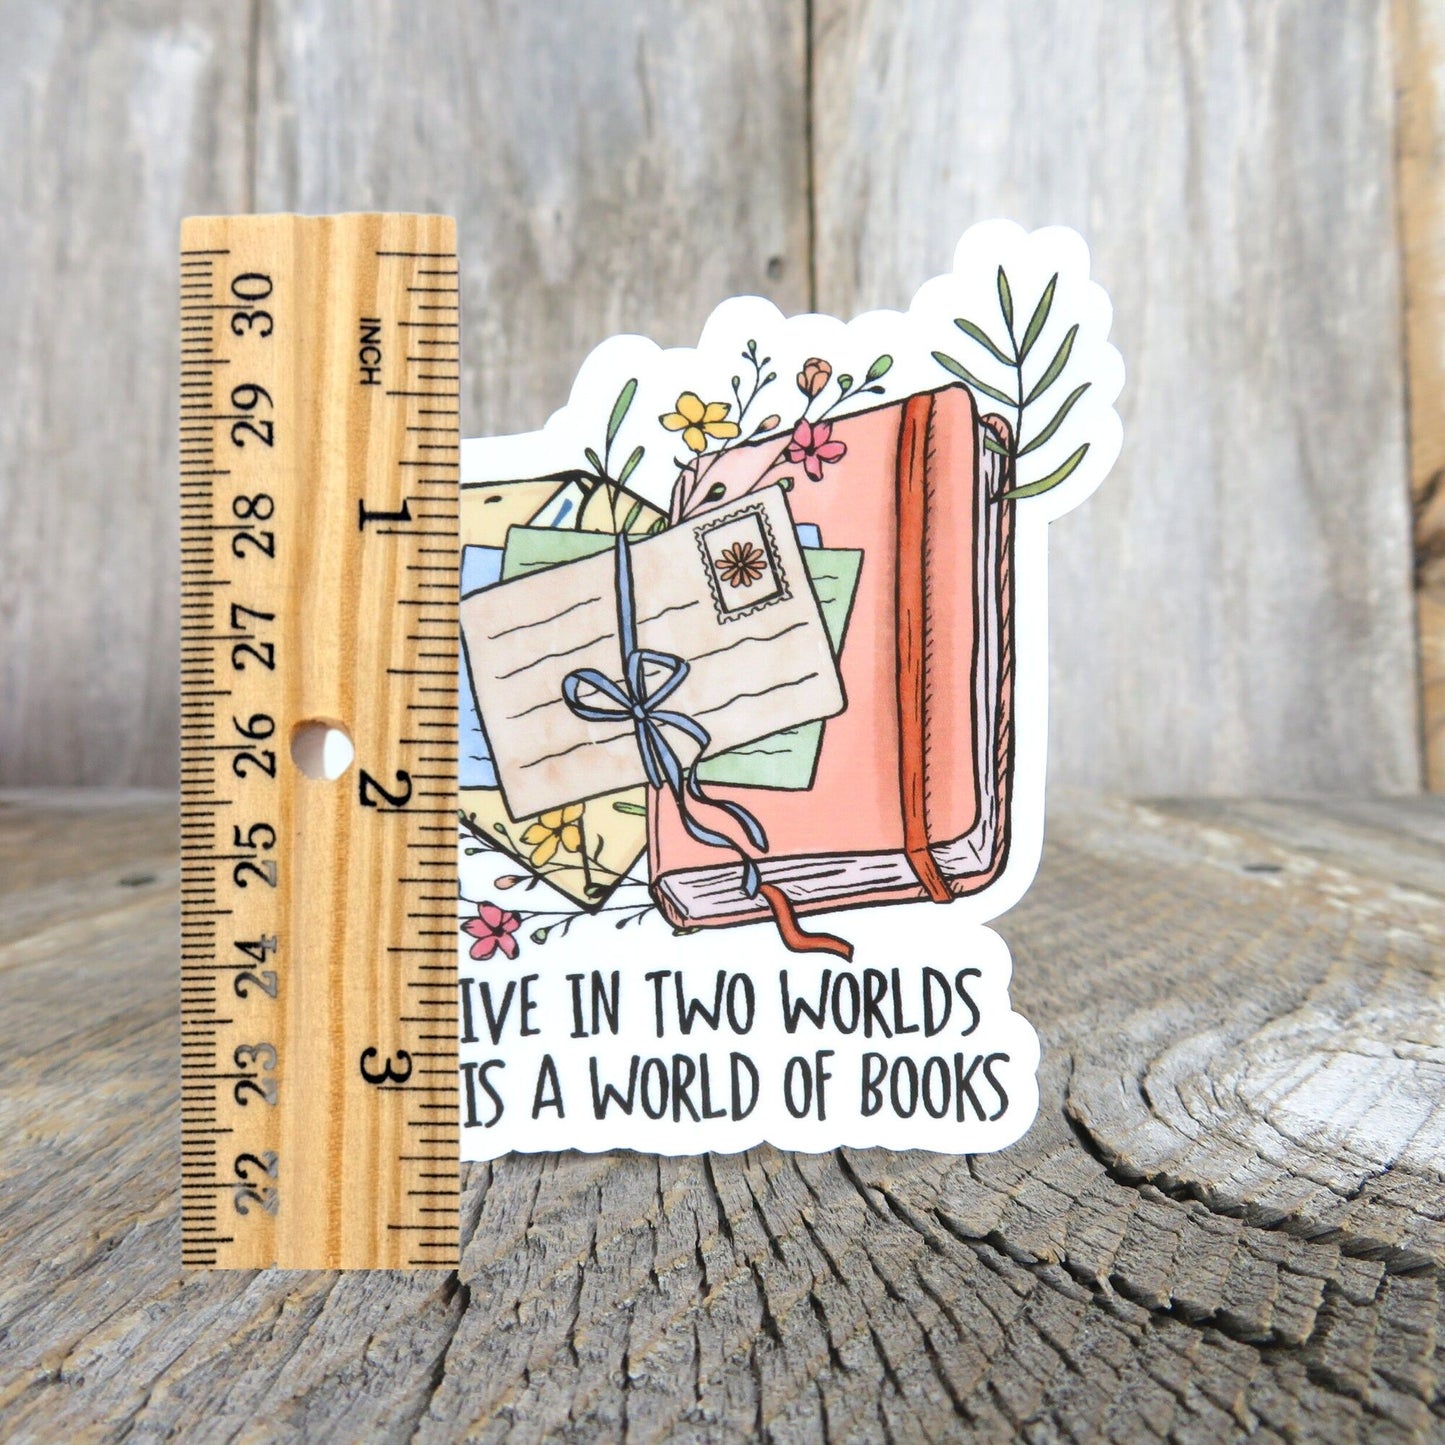 I Live in Two Worlds - One is a World of Books Sticker Book Lovers Readers Gift Laptop Sticker